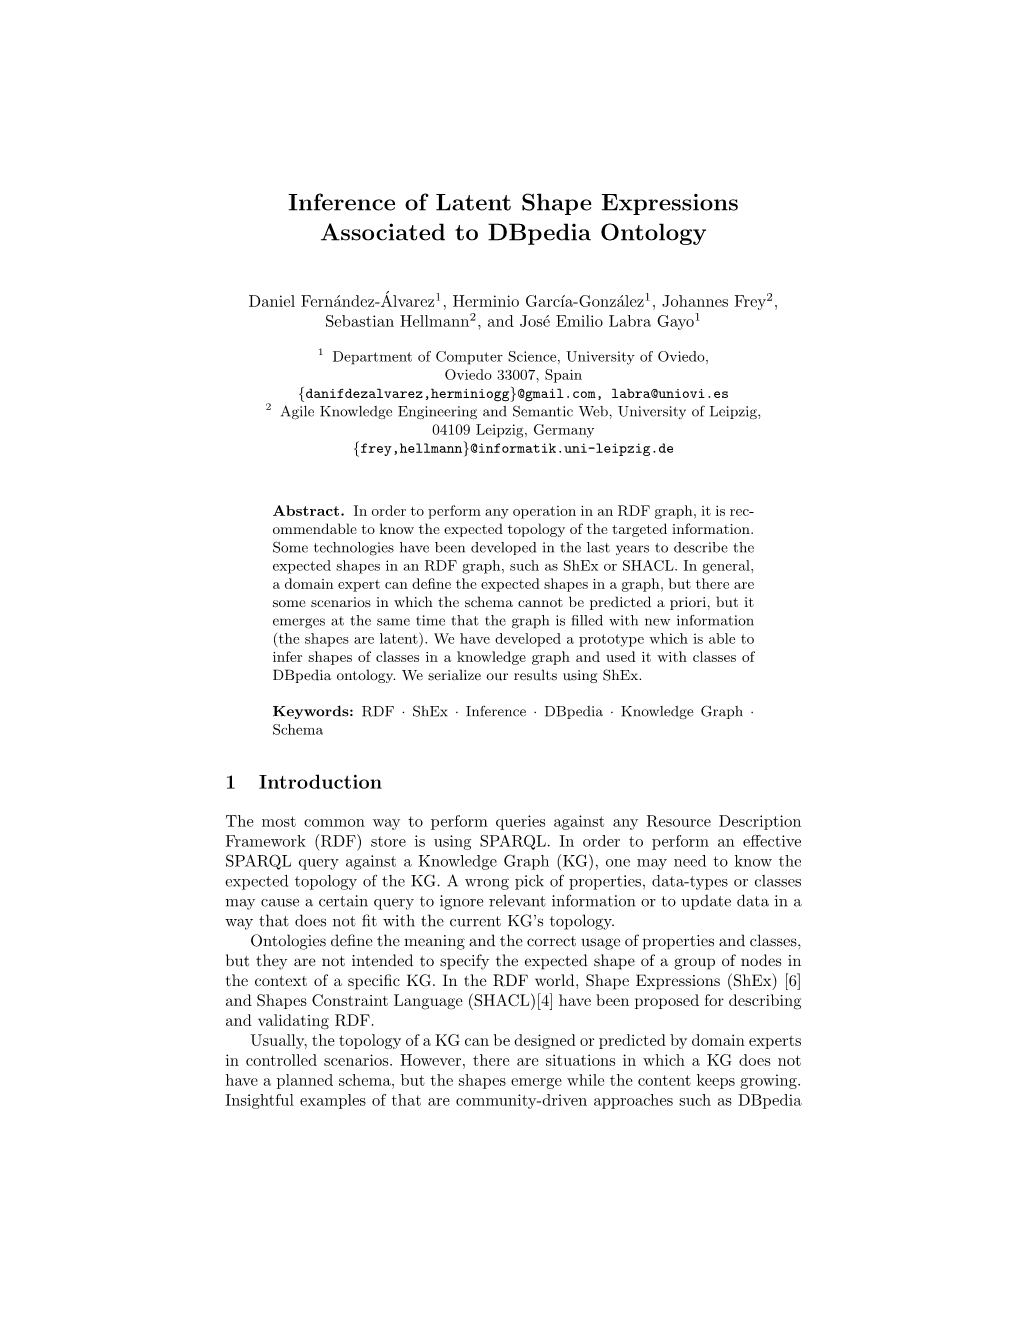 Inference of Latent Shape Expressions Associated to Dbpedia Ontology